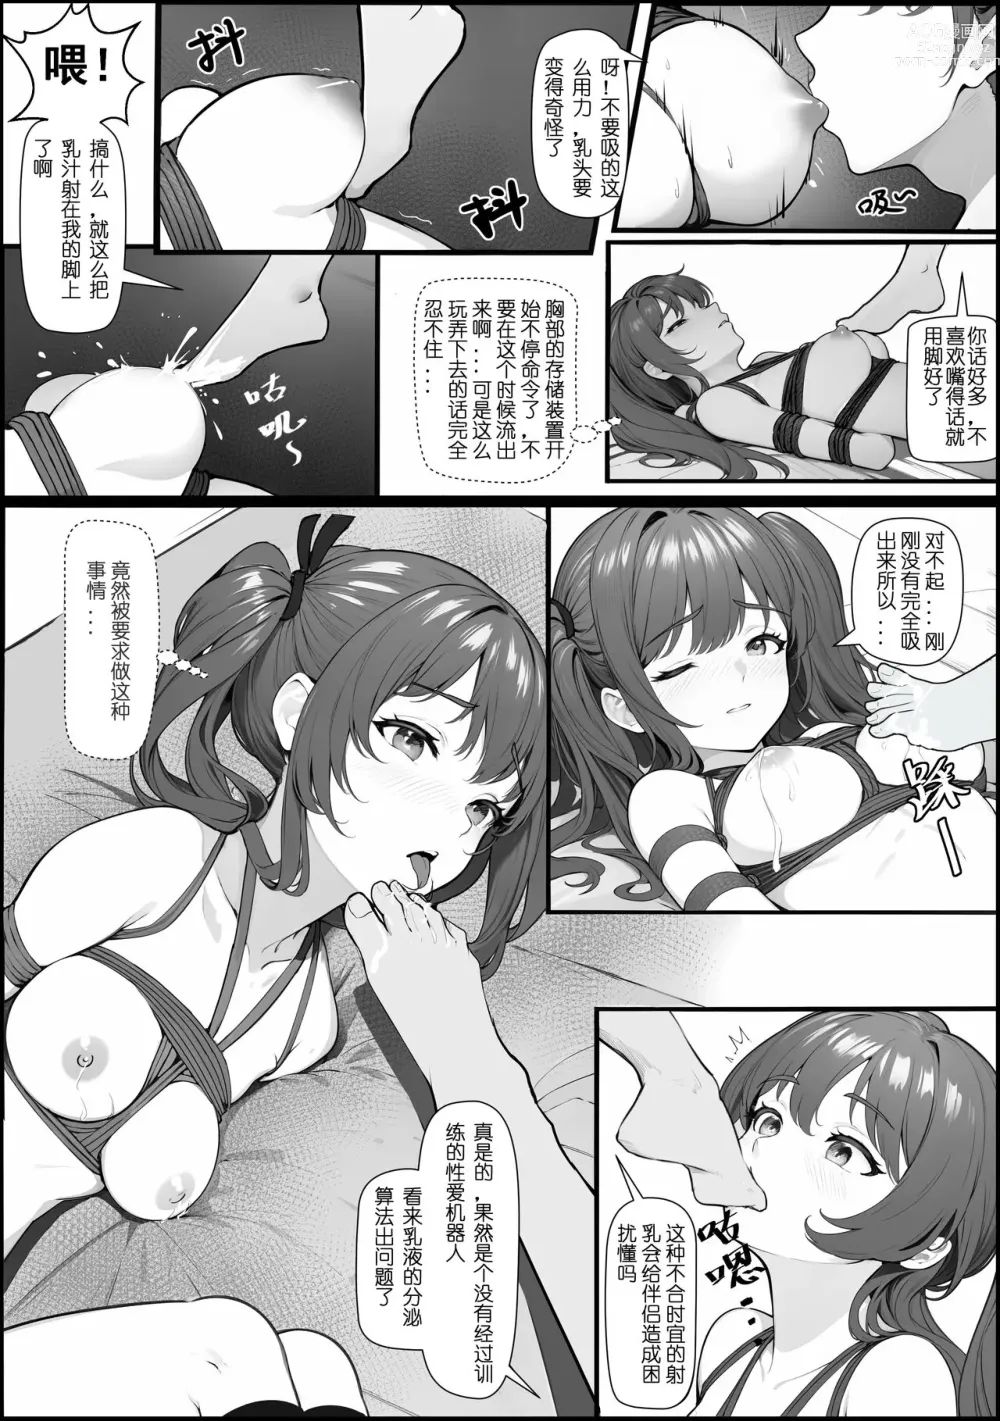 Page 5 of doujinshi 01号人偶剧情